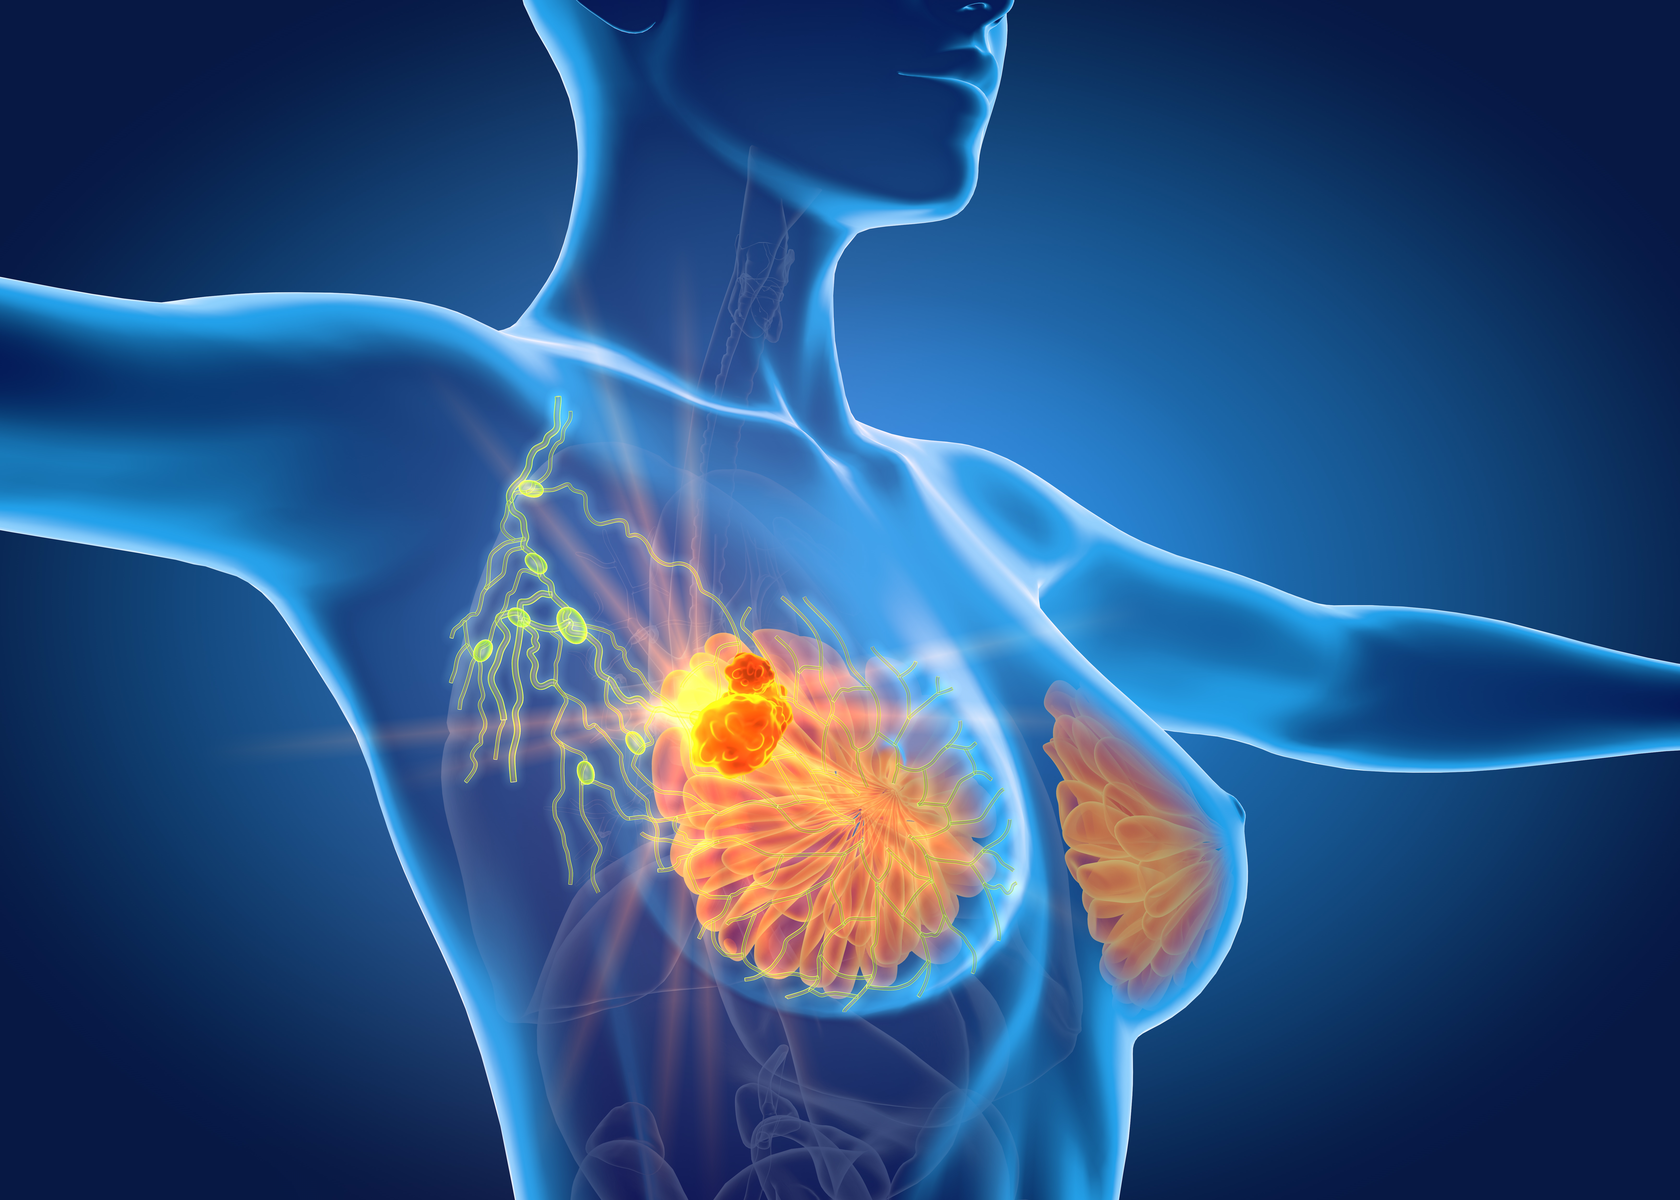 New Targets for Treatment of Triple-Negative Breast Cancer Discovered